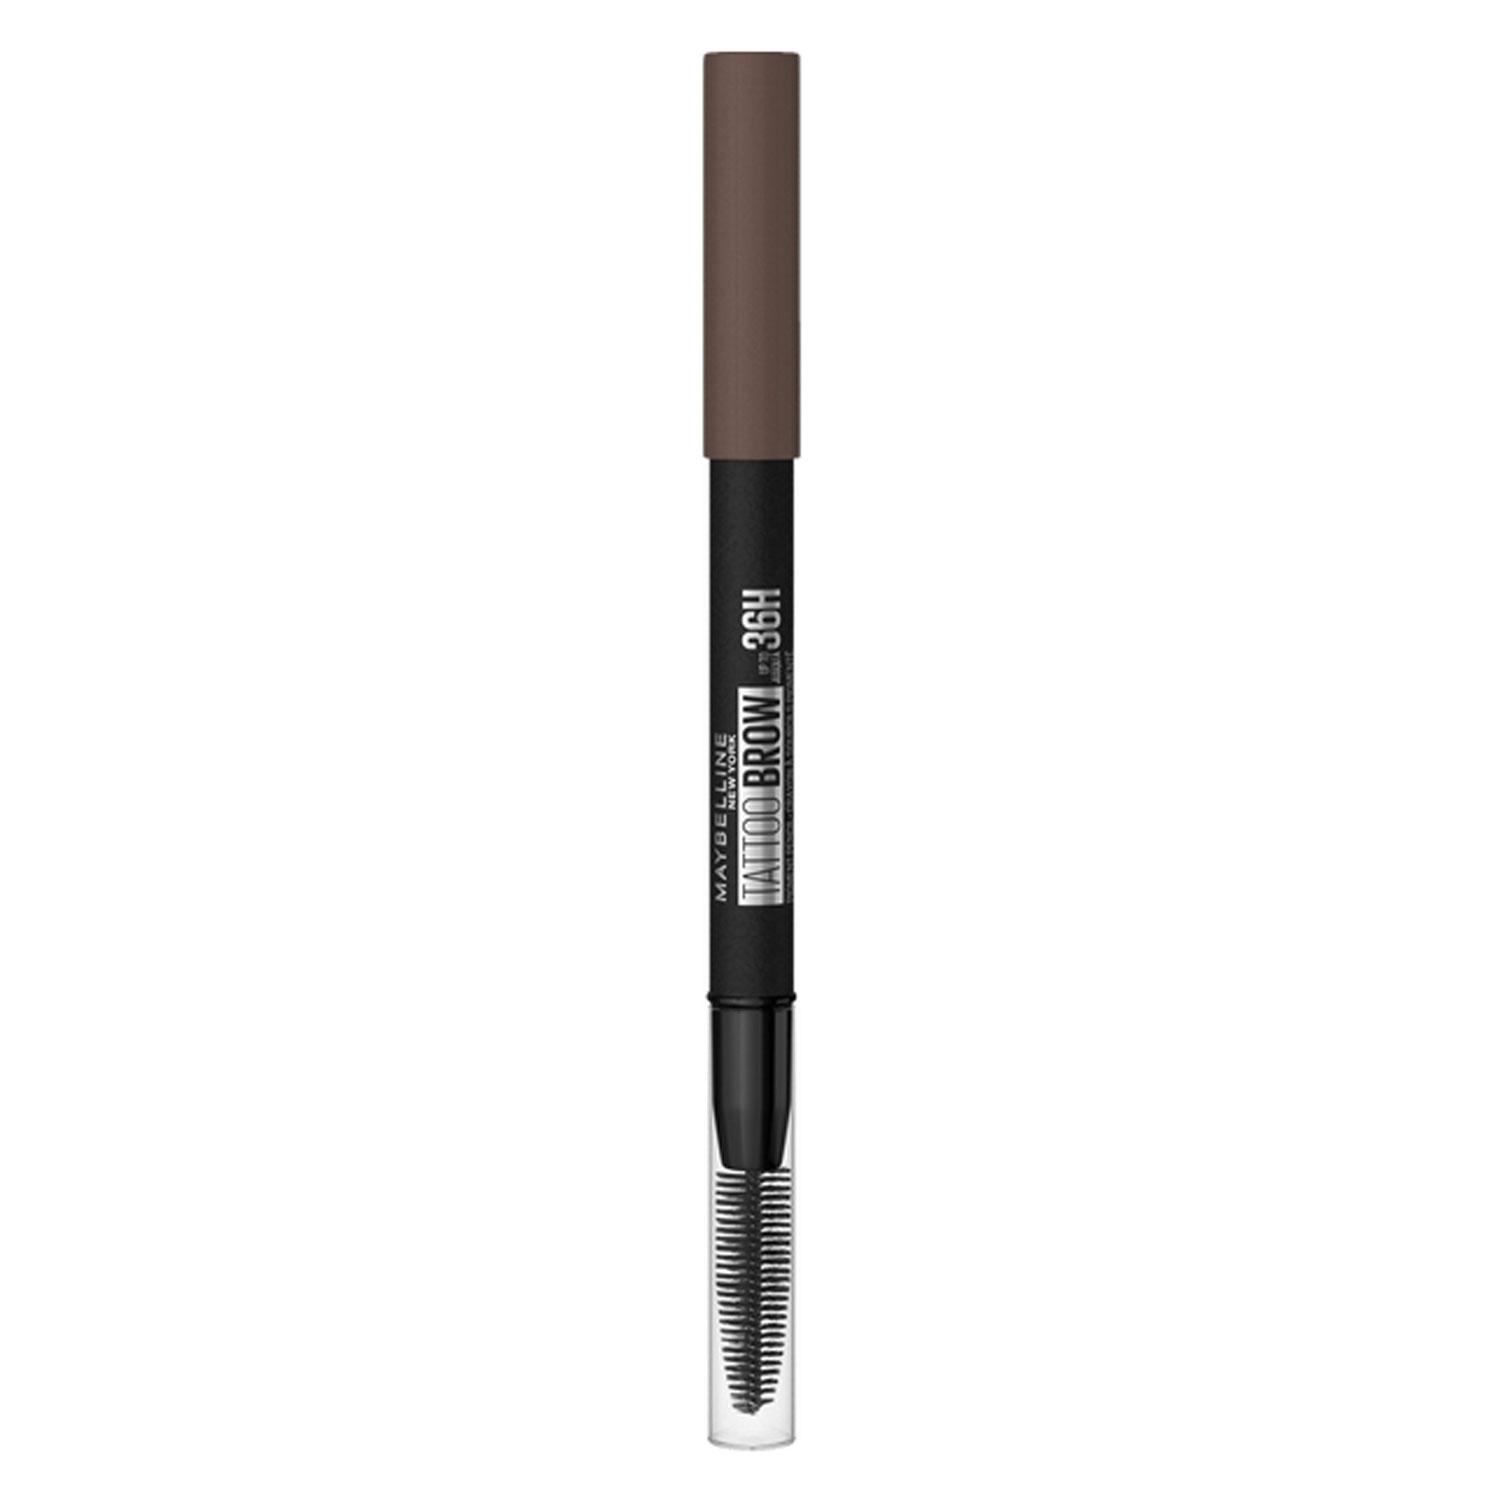 Maybelline NY Brows - Tattoo Brow 36H Augenbrauenstift Nr. 7 Deep Brown